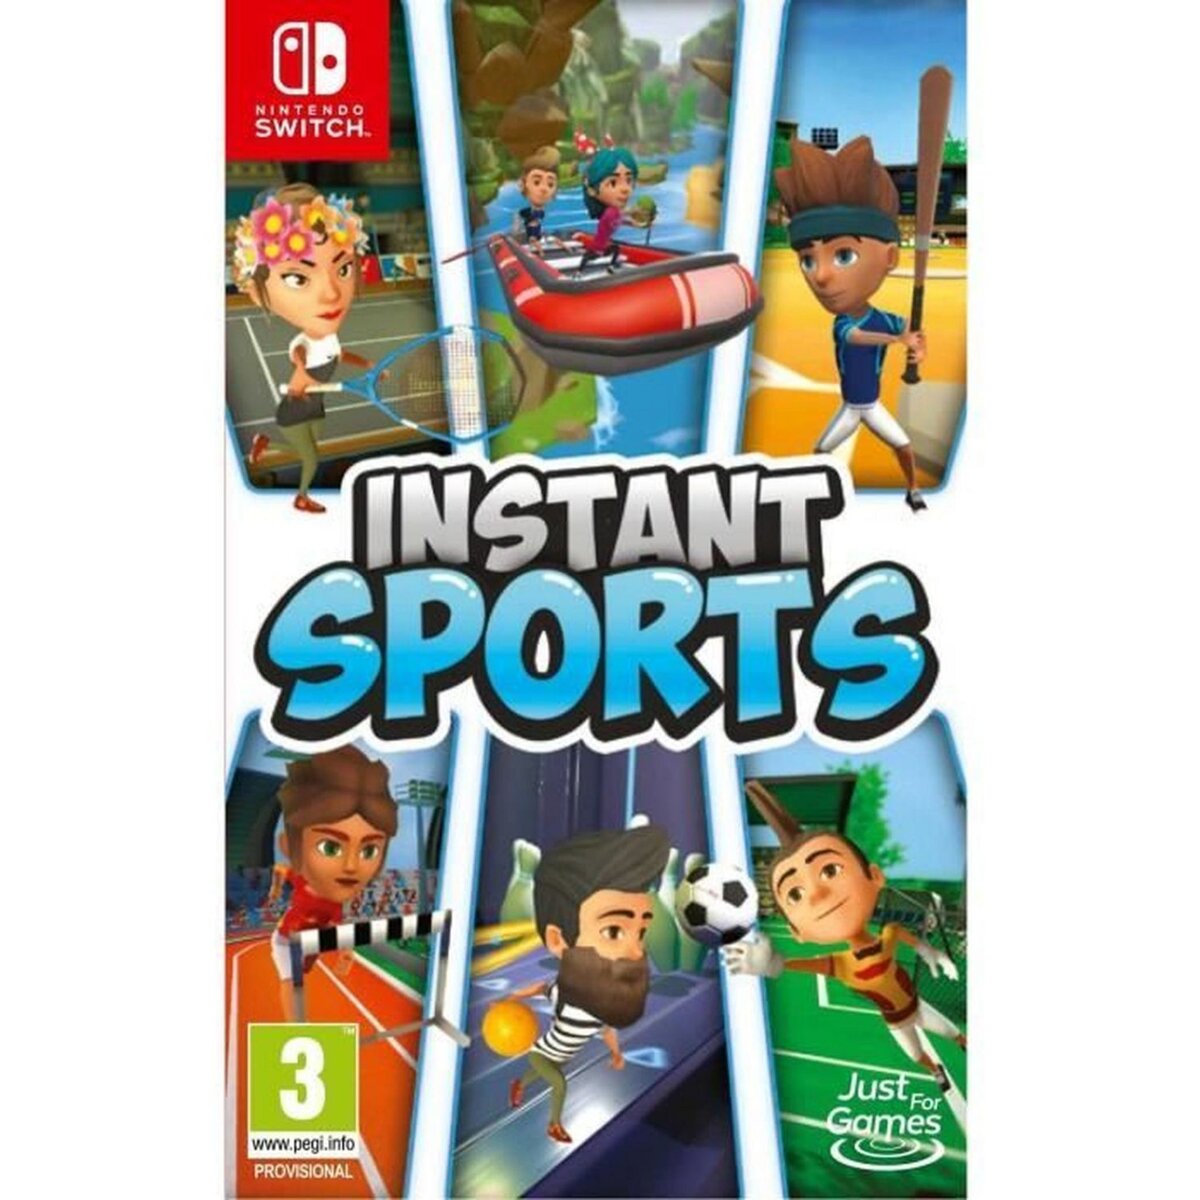 JUST FOR GAMES Instant Sports Nintendo Switch